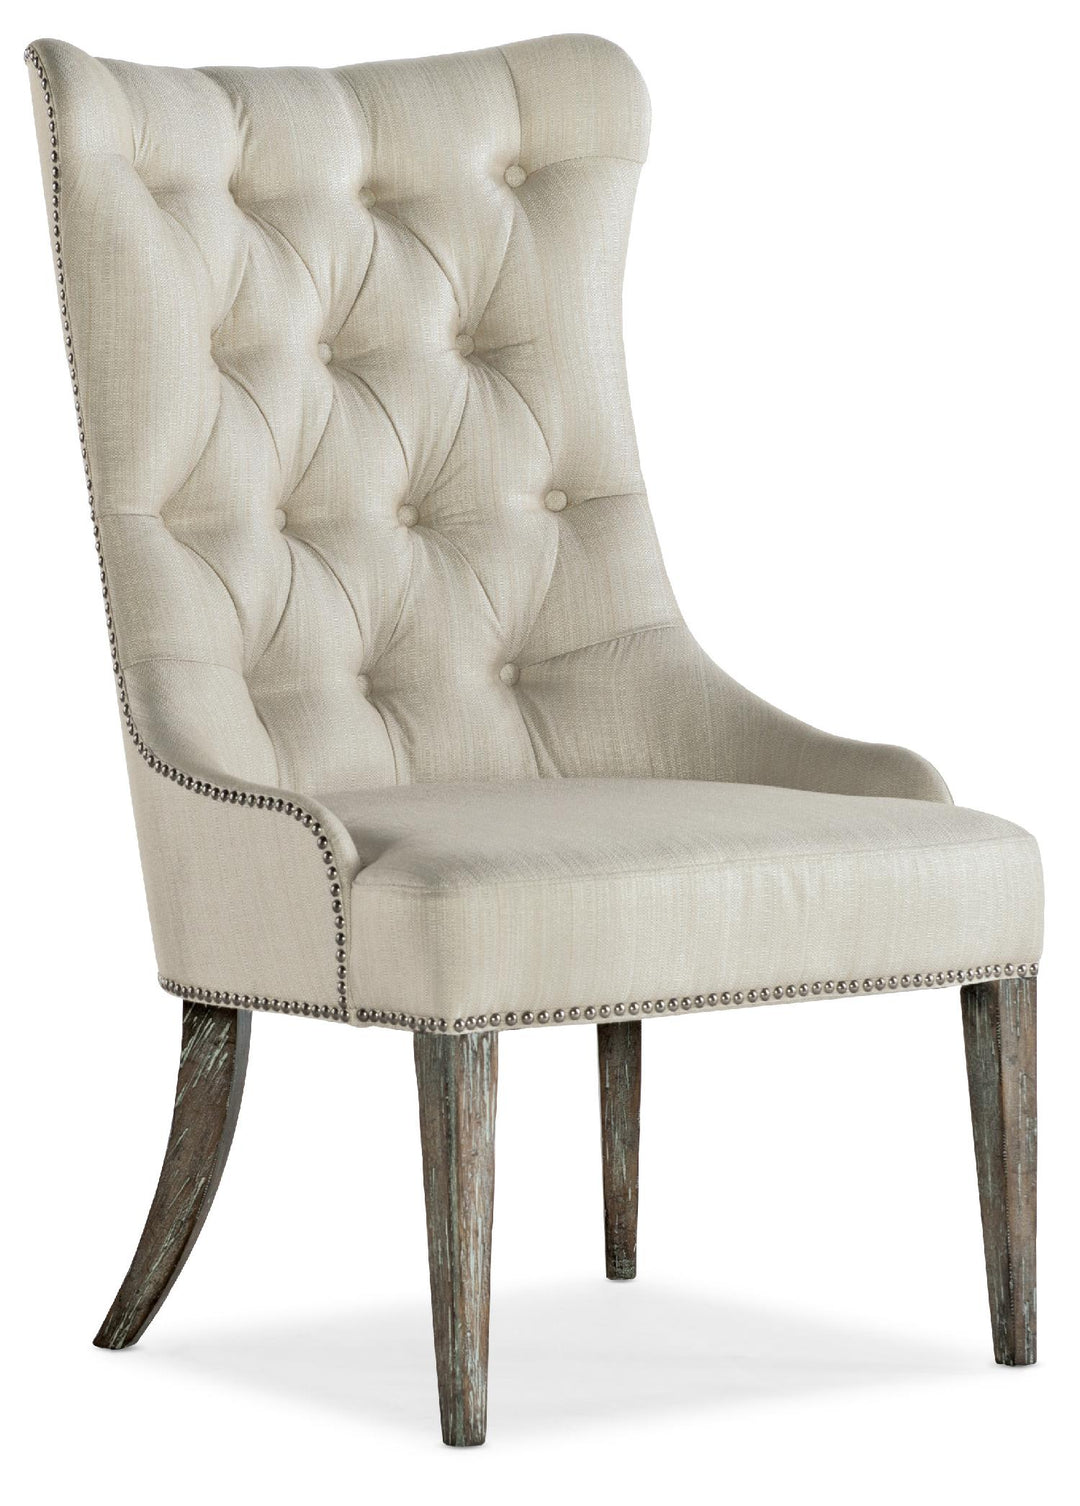 American Home Furniture | Hooker Furniture - Sanctuary Hostesse Upholstered Chair - Set of 2